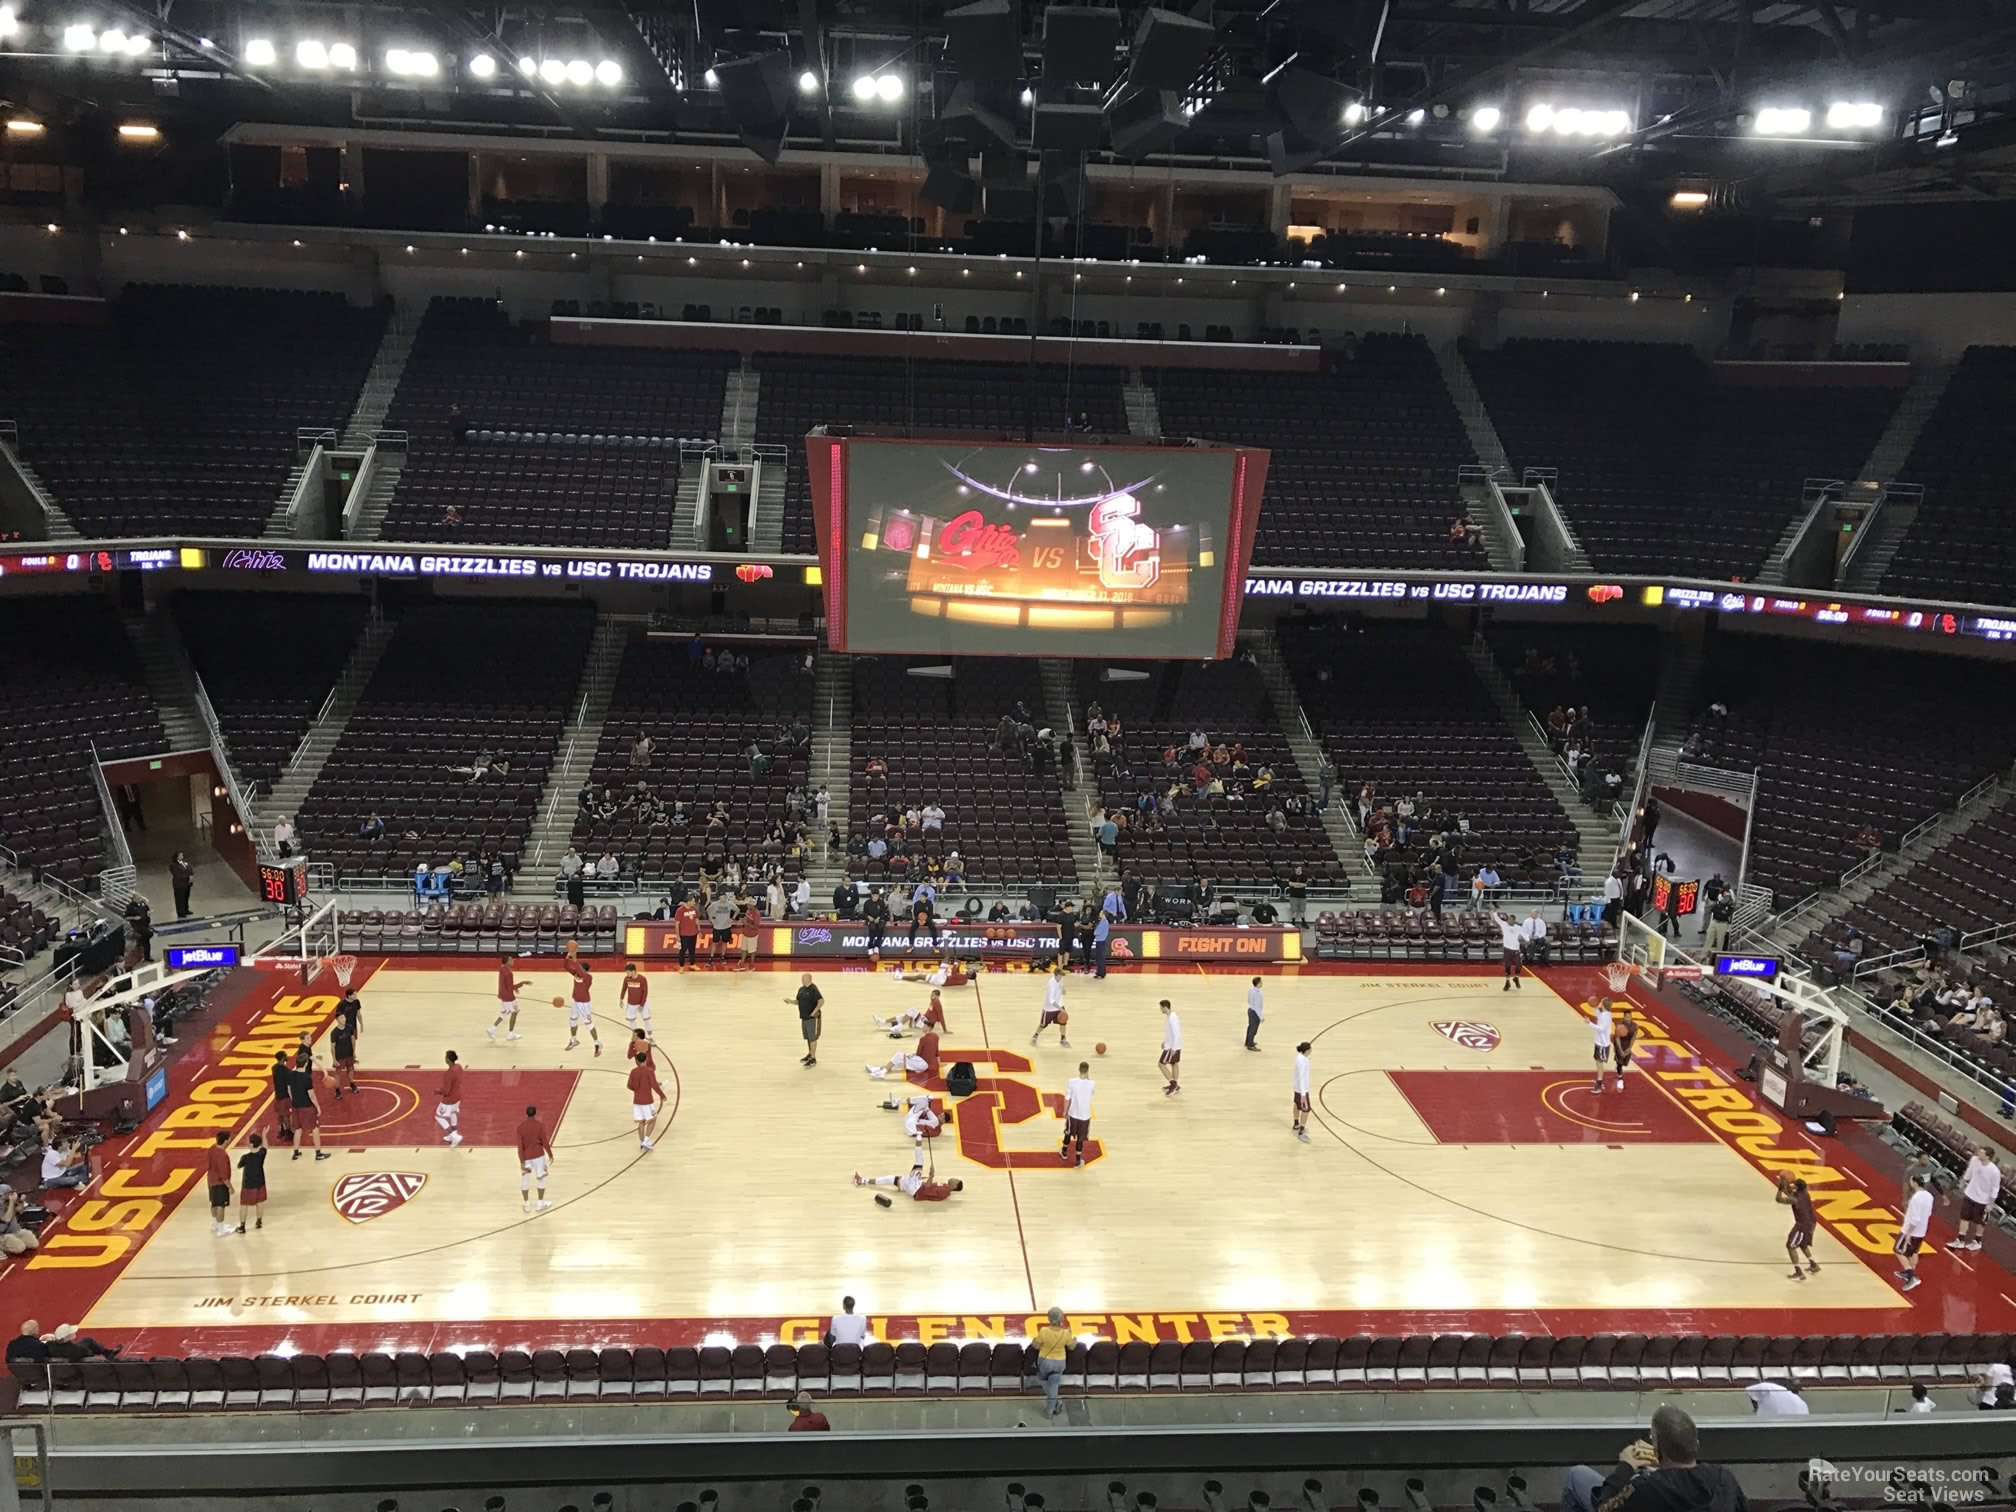 section 205, row 10 seat view  - galen center